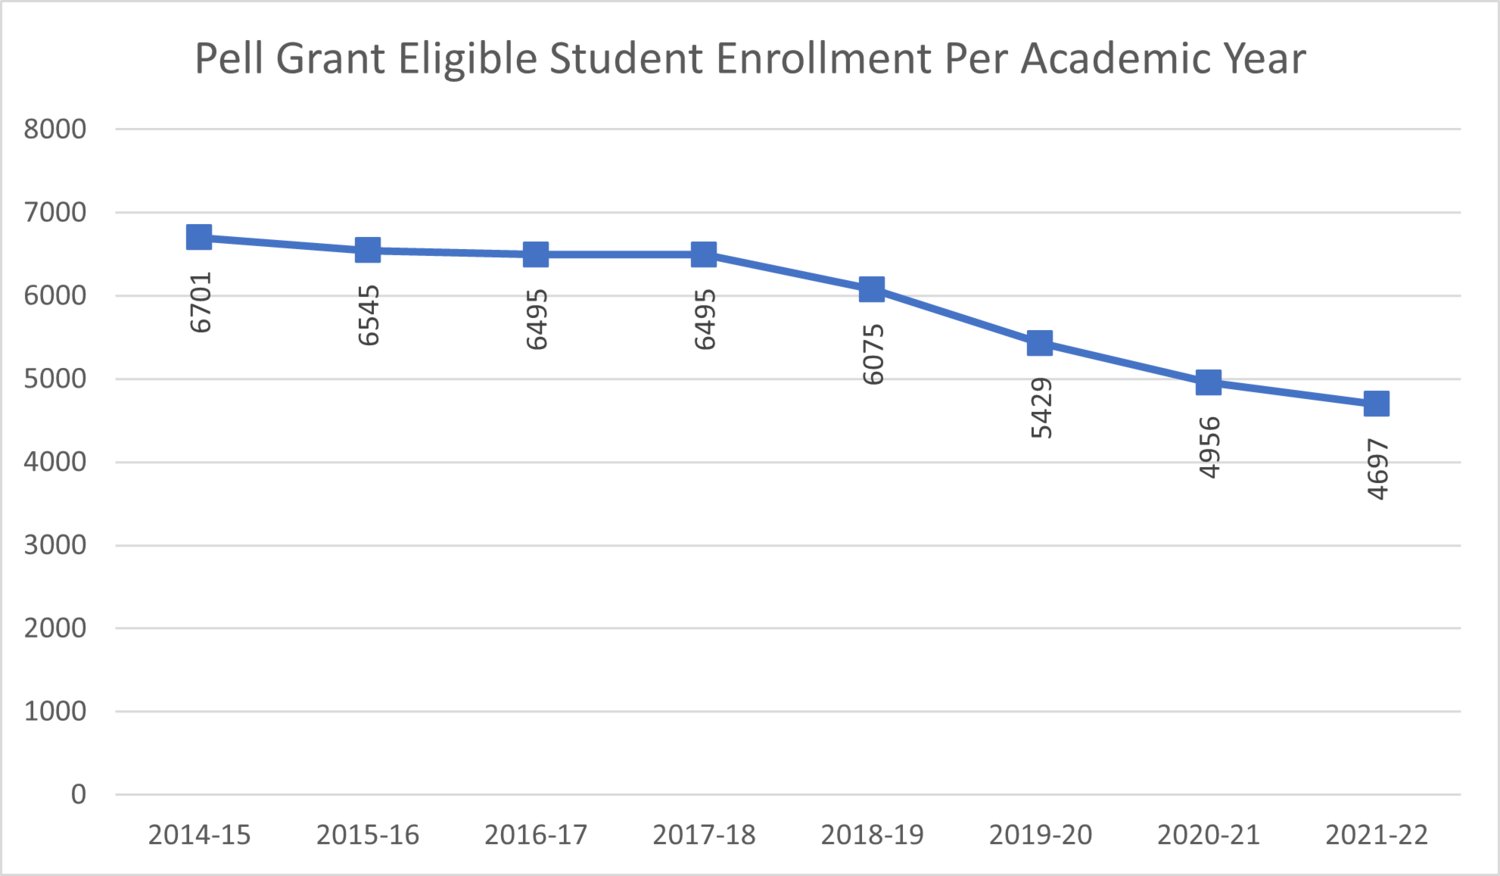 Pell-eligible student enrollment is on the decline at MSU.